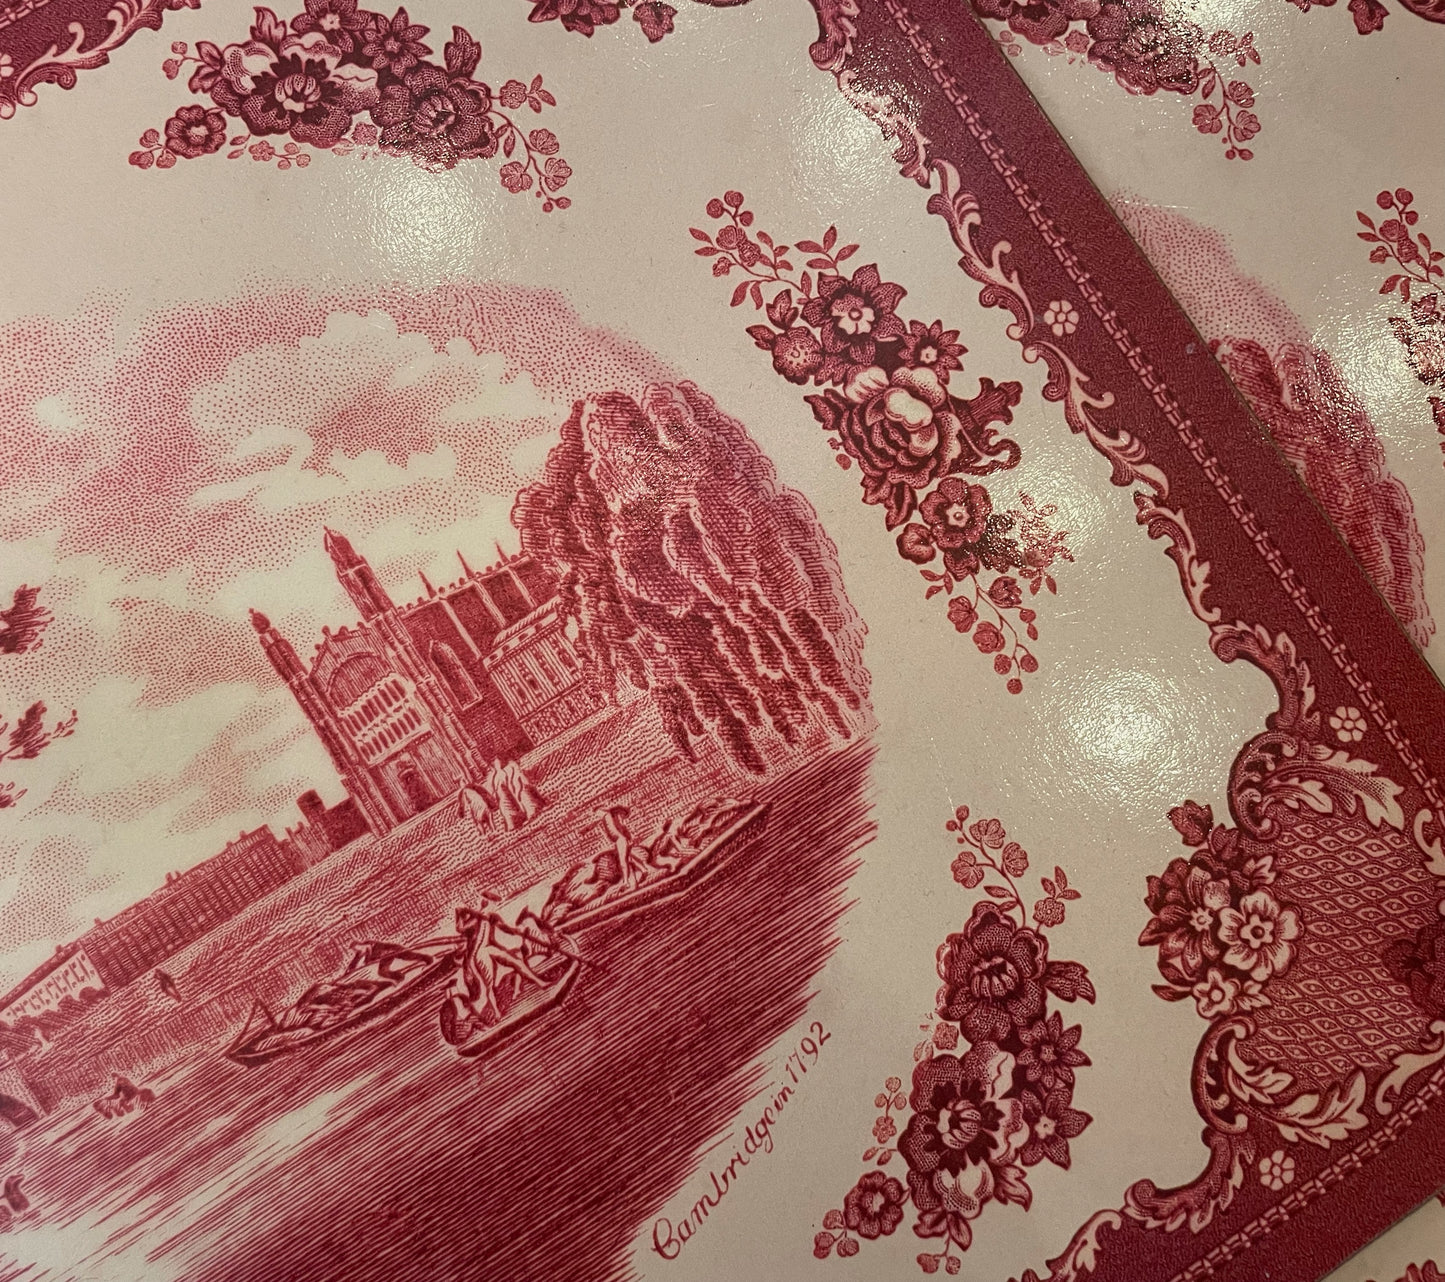 Red Toile Placemats (2)